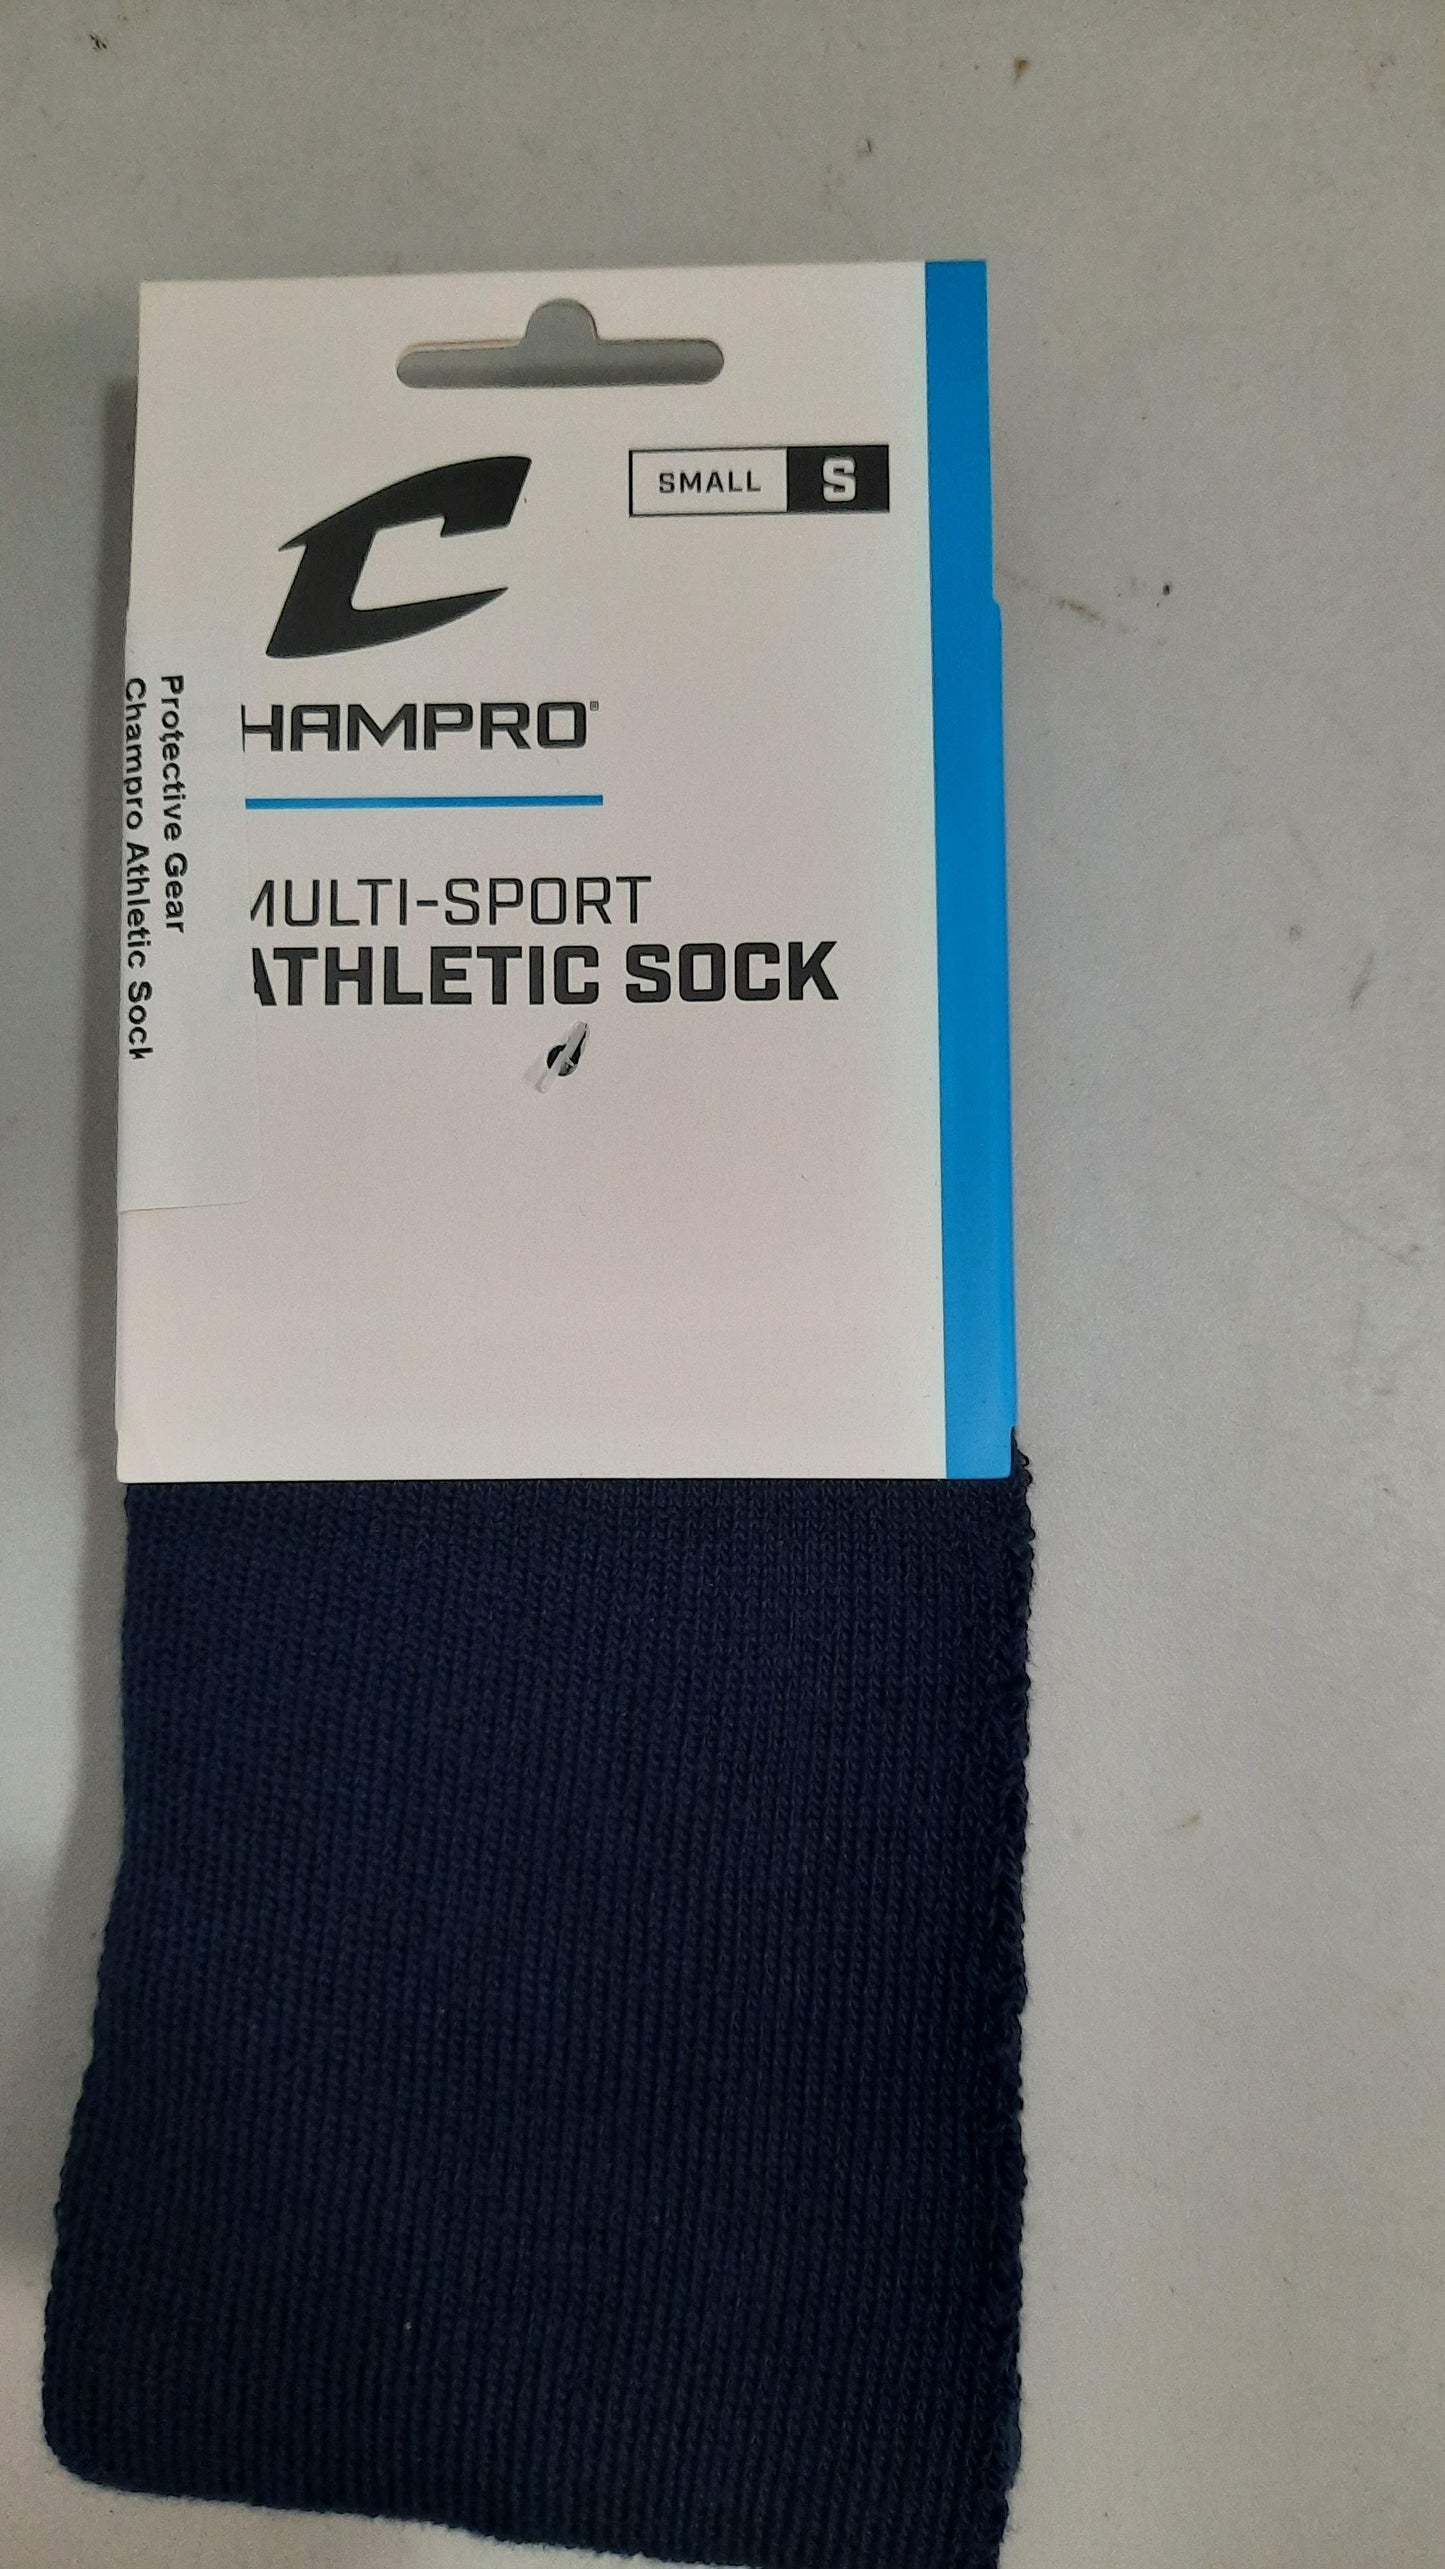 Champro Athletic Socks Size Small Color Navy Blue Multi-Sport Condition New